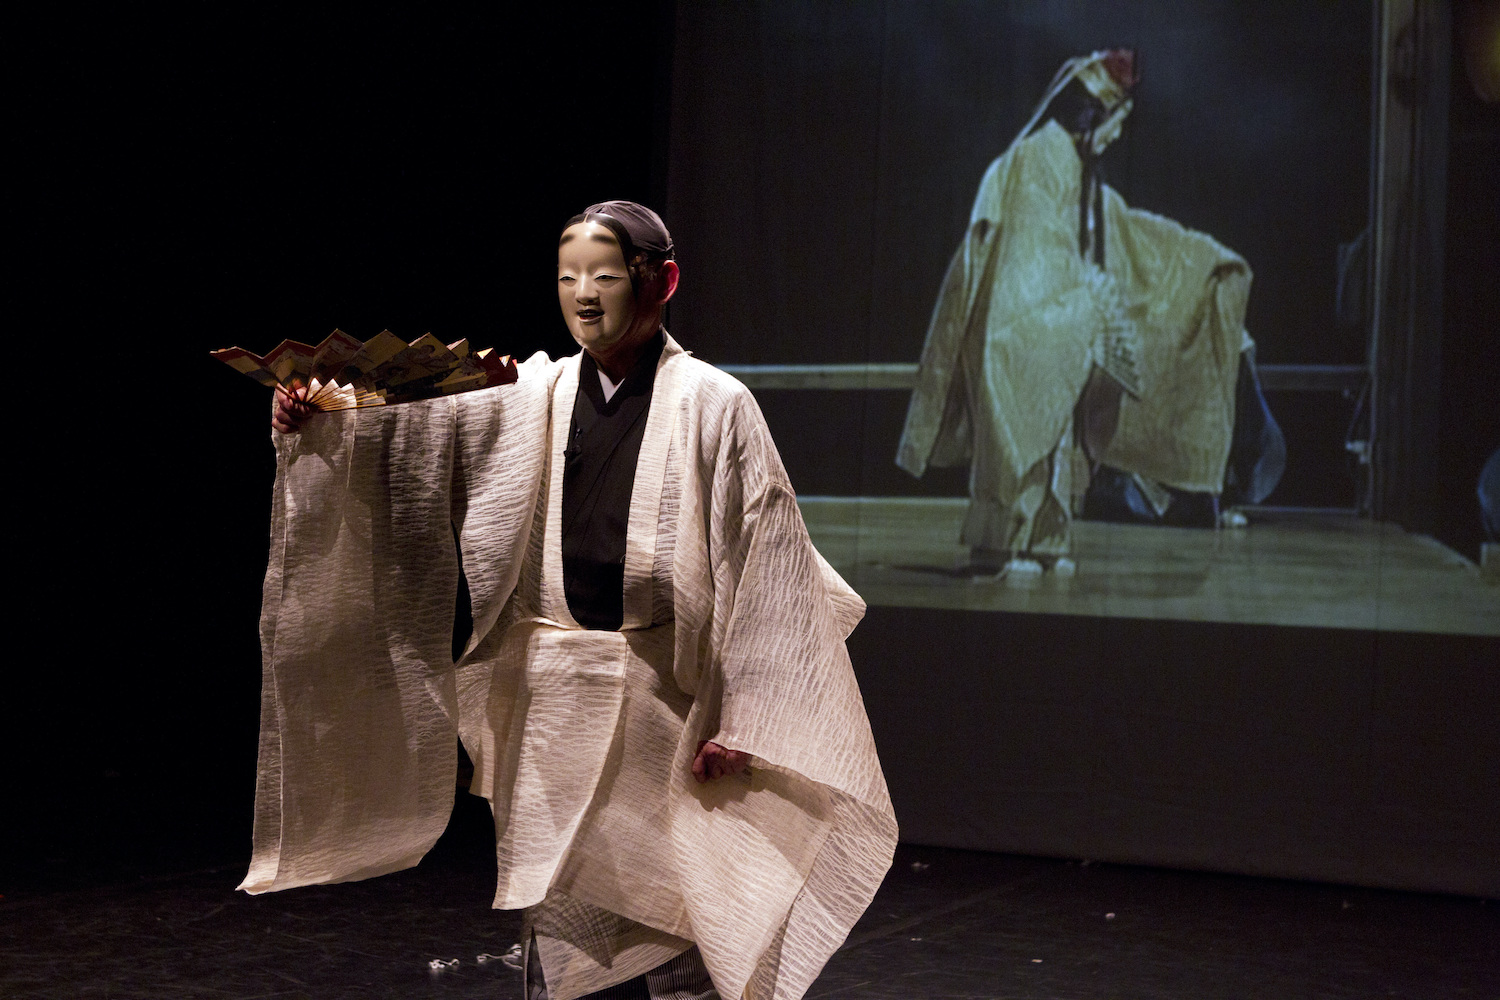 BUDAPEST, HUNGARY - APRIL 7: Reijiro Tsumura japan noh master presents the noh theater tradition in the Merlin theater on the memorial day of earthquake in Japan on April 7, 2011 in Budapest, Hungary.